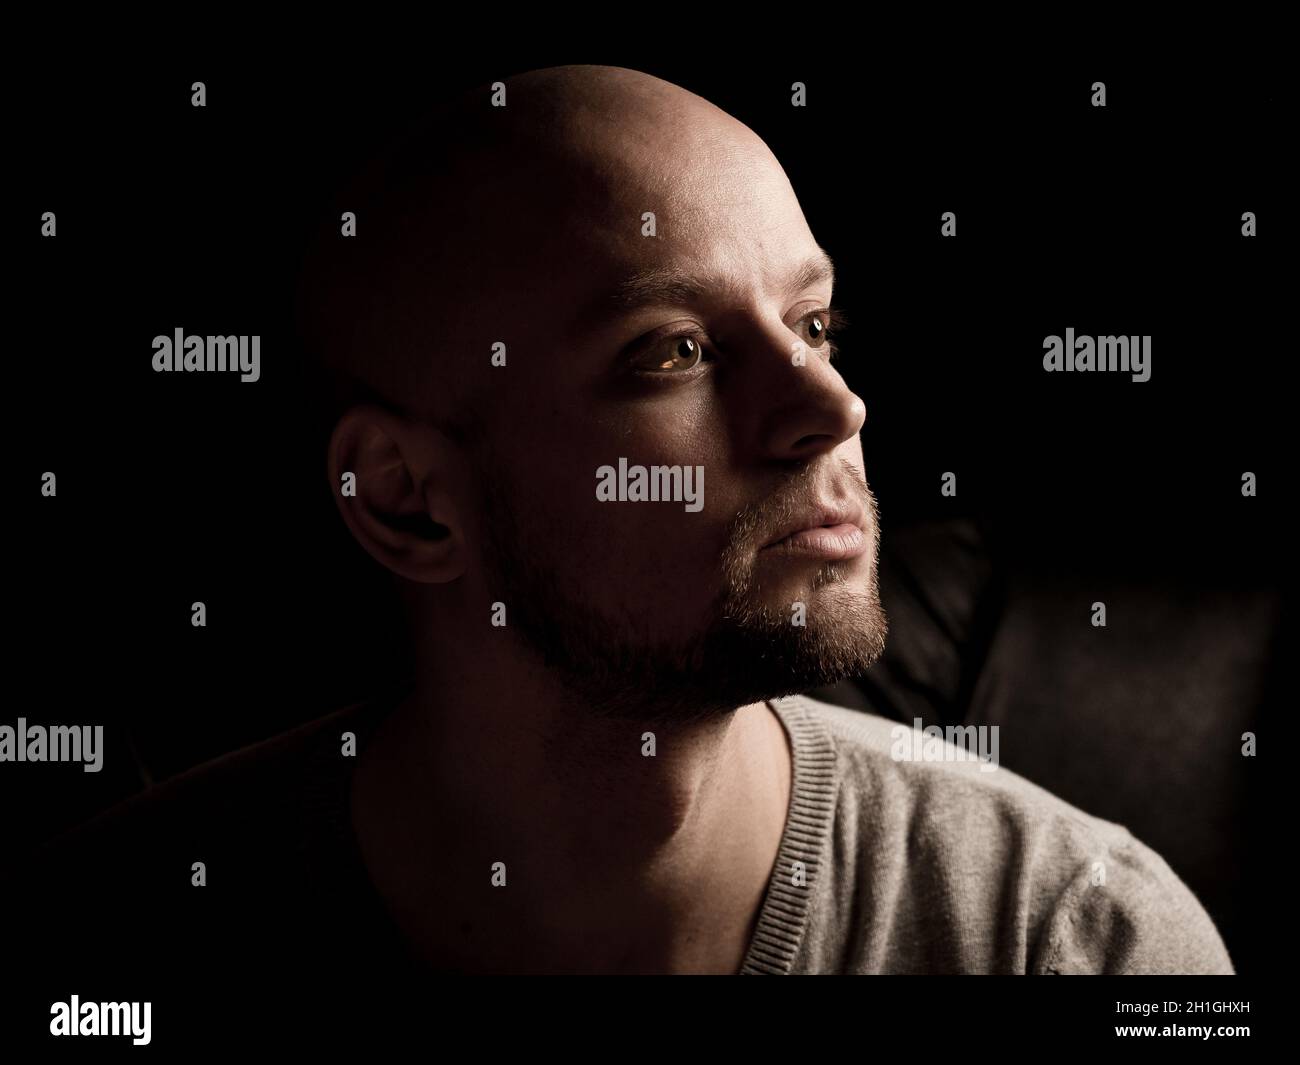 skinhead baldness shaved head man angry racist anger Stock Photo